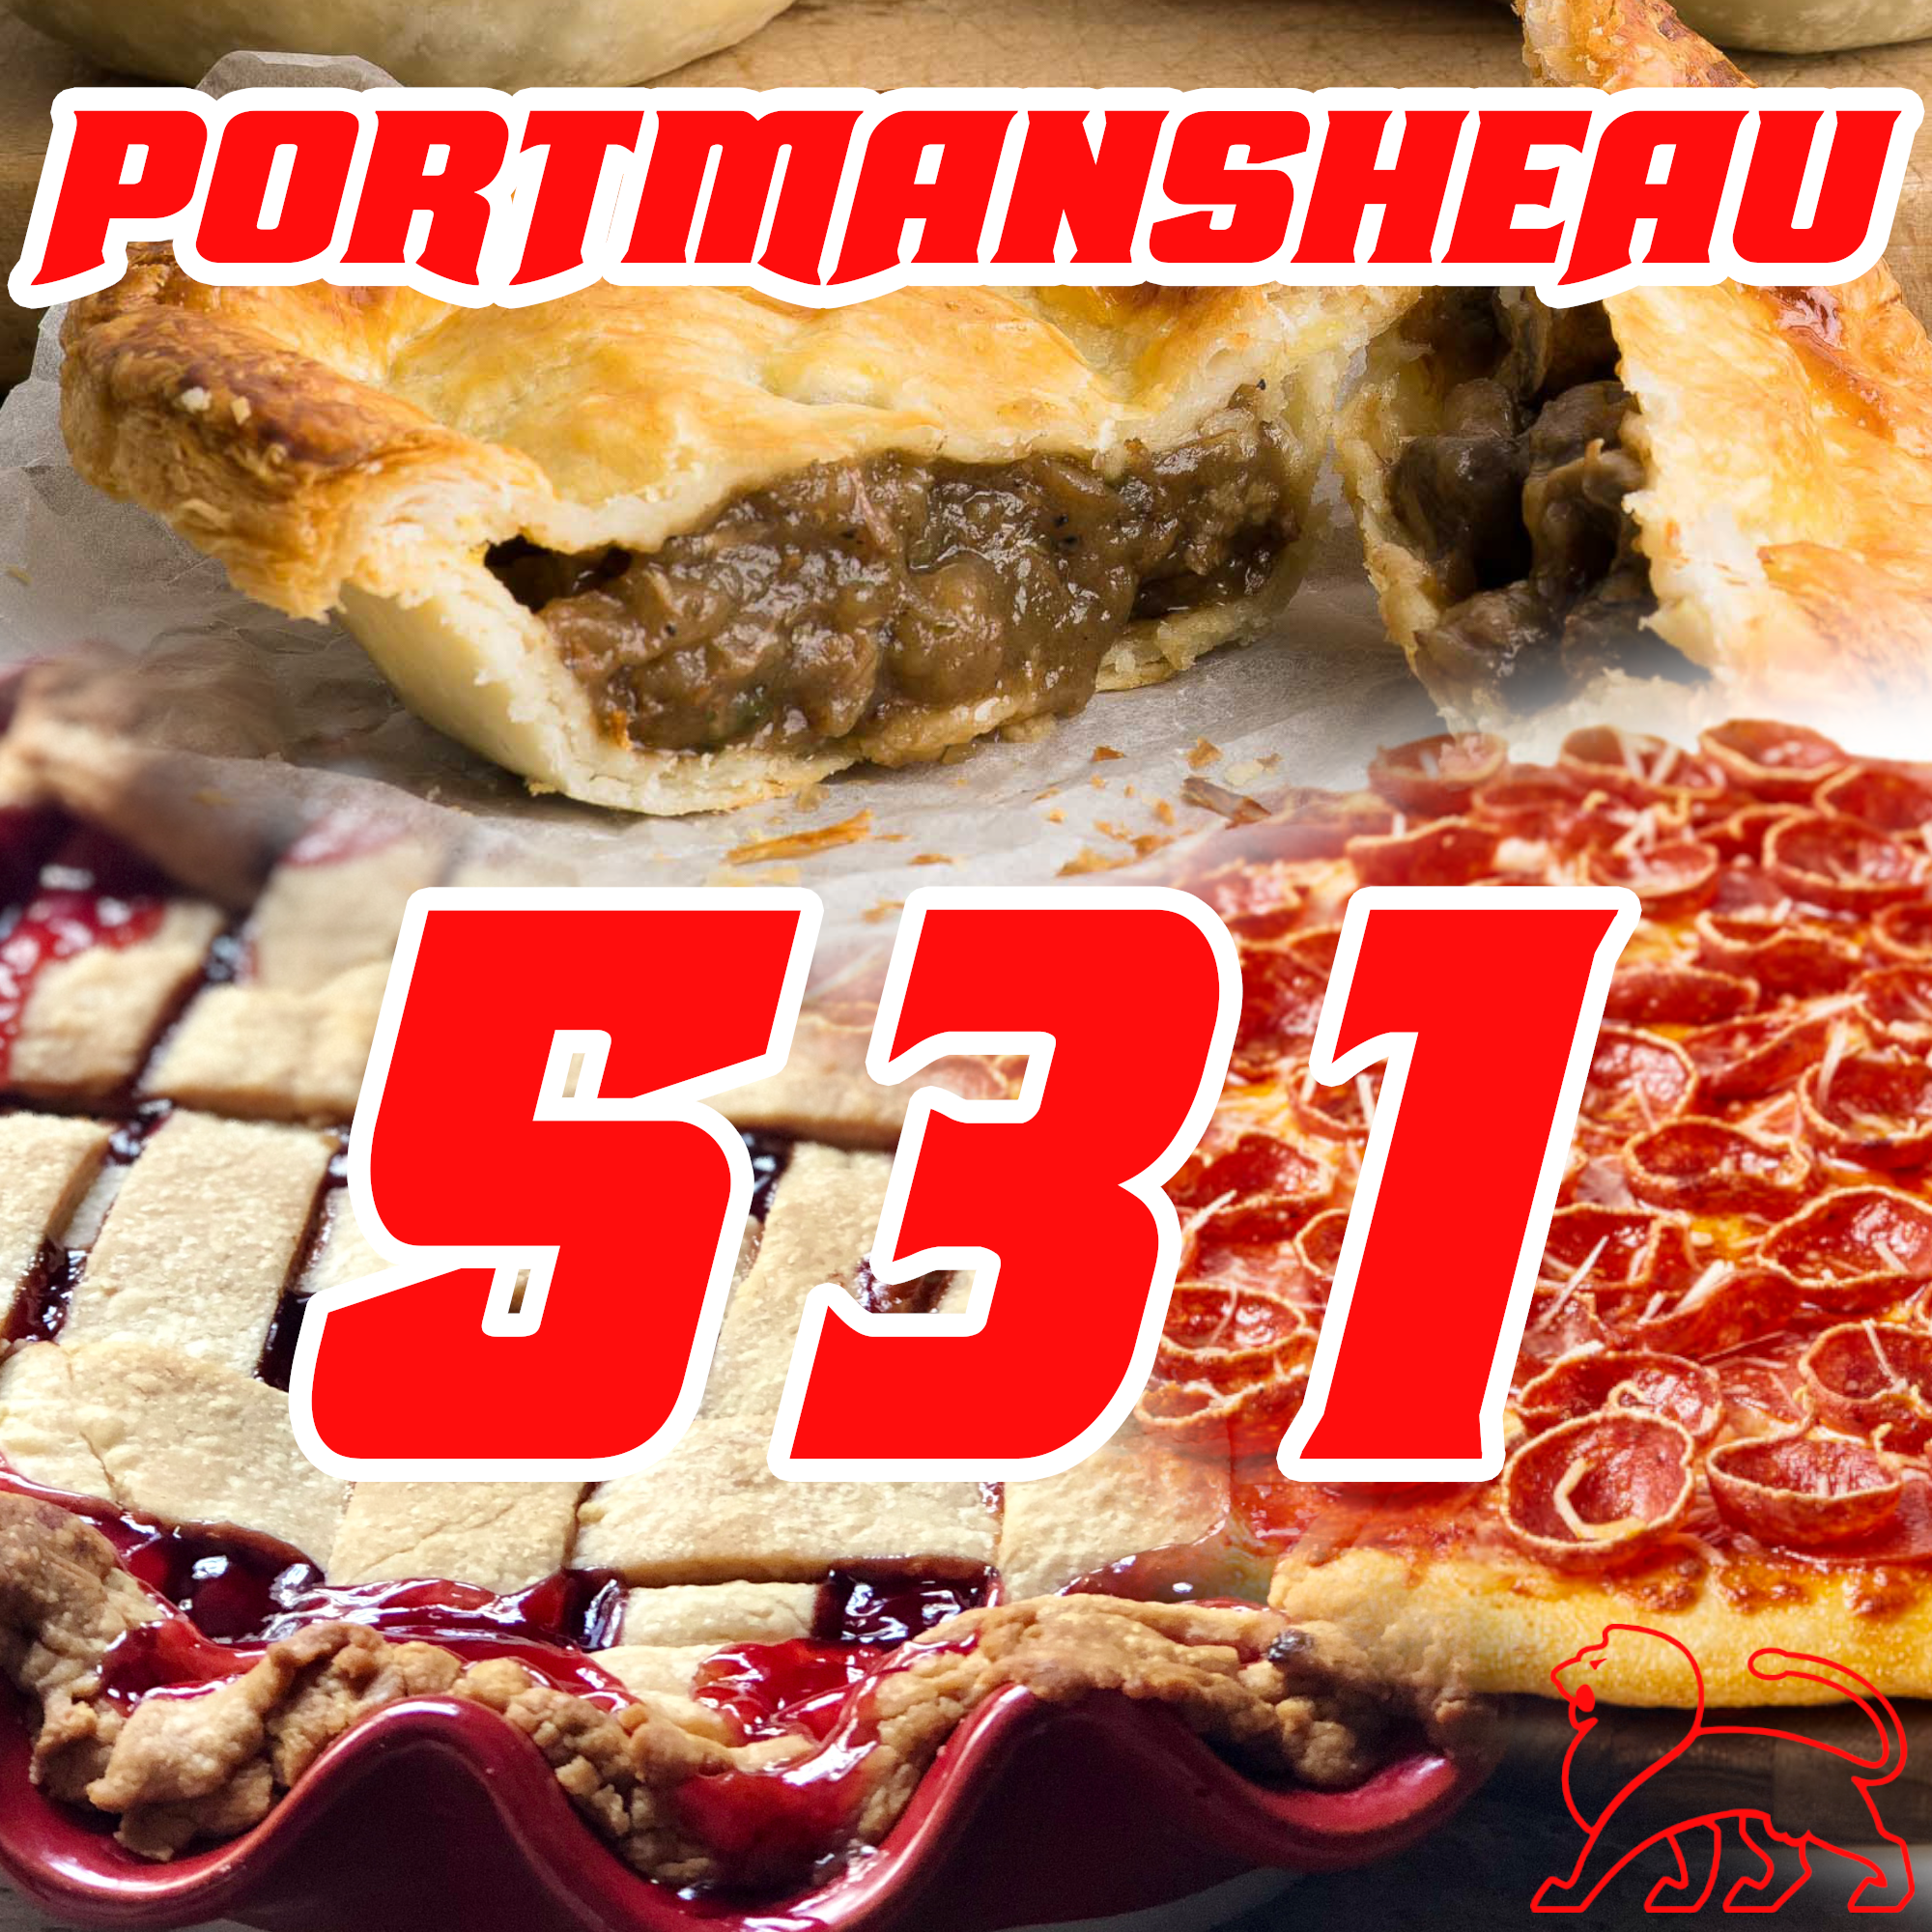 531: Enough of the Sweet Pies and On To the Meat Pies, Right Guys?